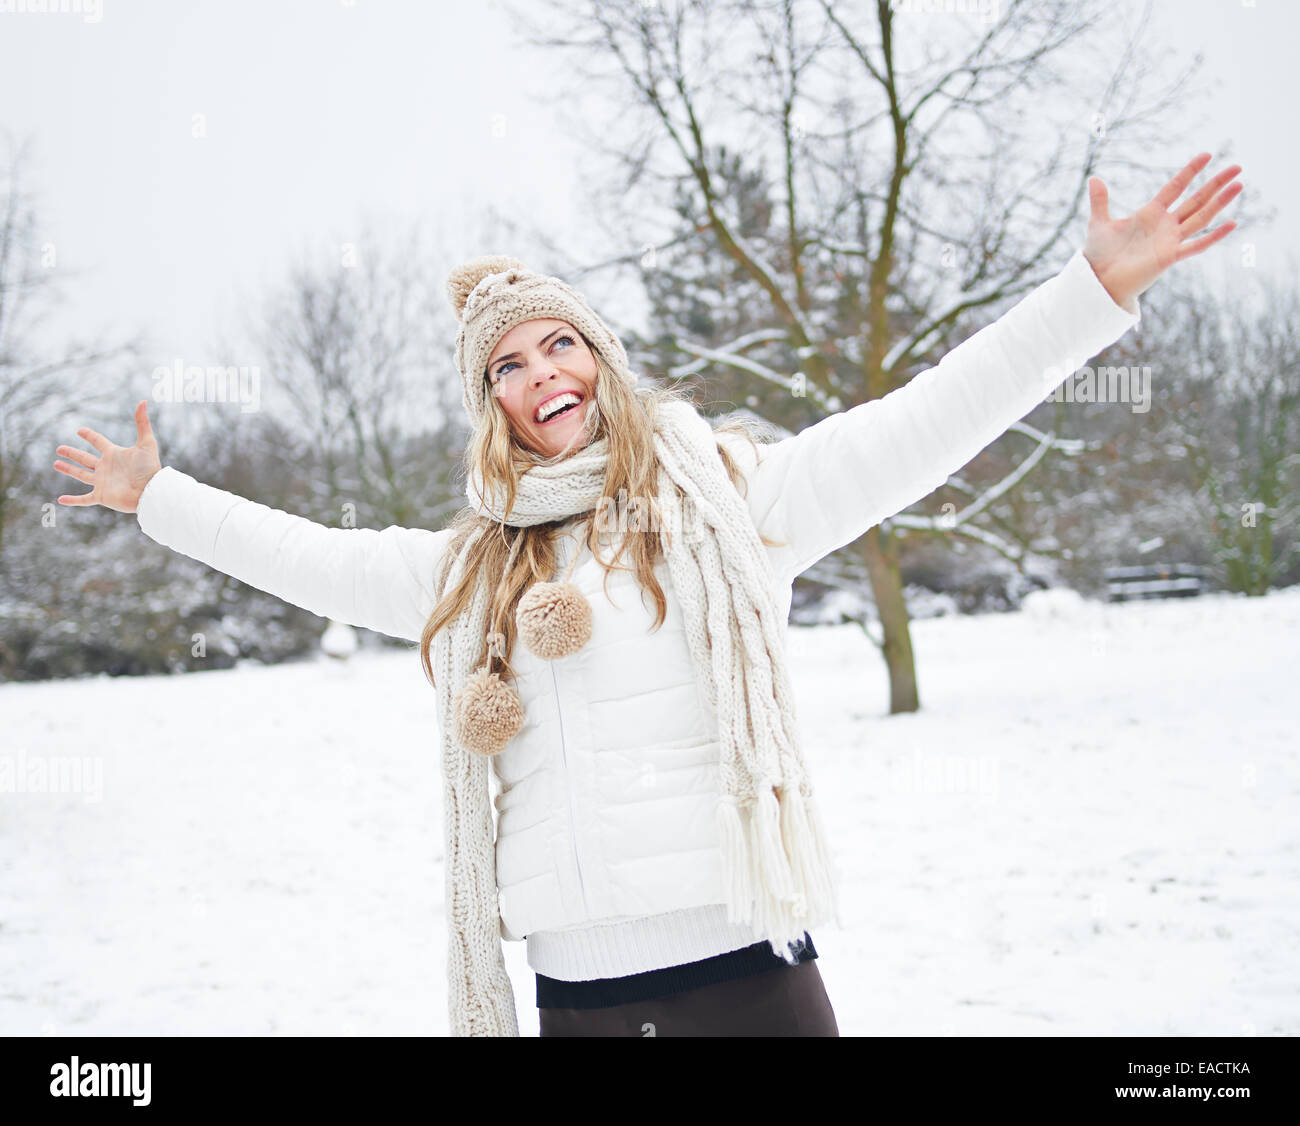 Happy woman standing in winter snow with her arms stretched out Stock Photo